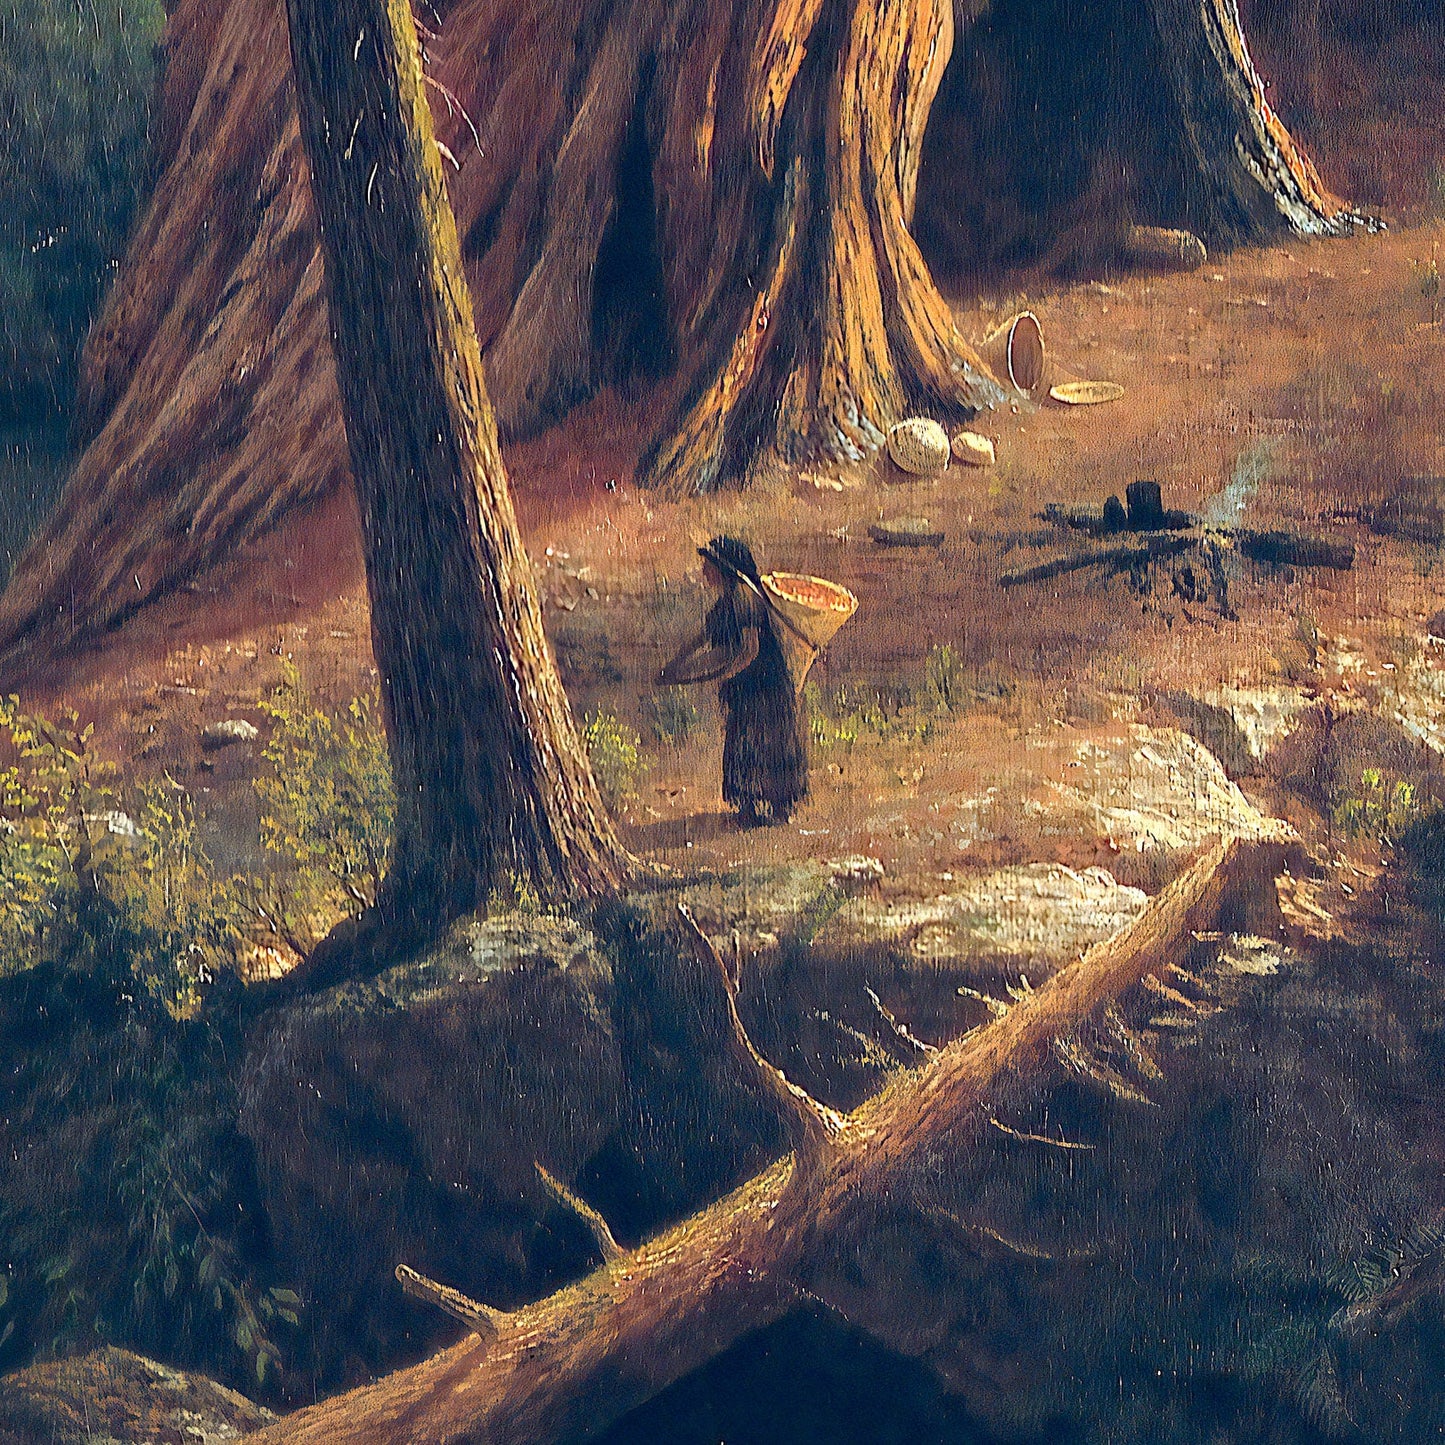 Giant Redwood Trees of California by Albert Bierstadt, 3d Printed with texture and brush strokes looks like original oil-painting, code:001